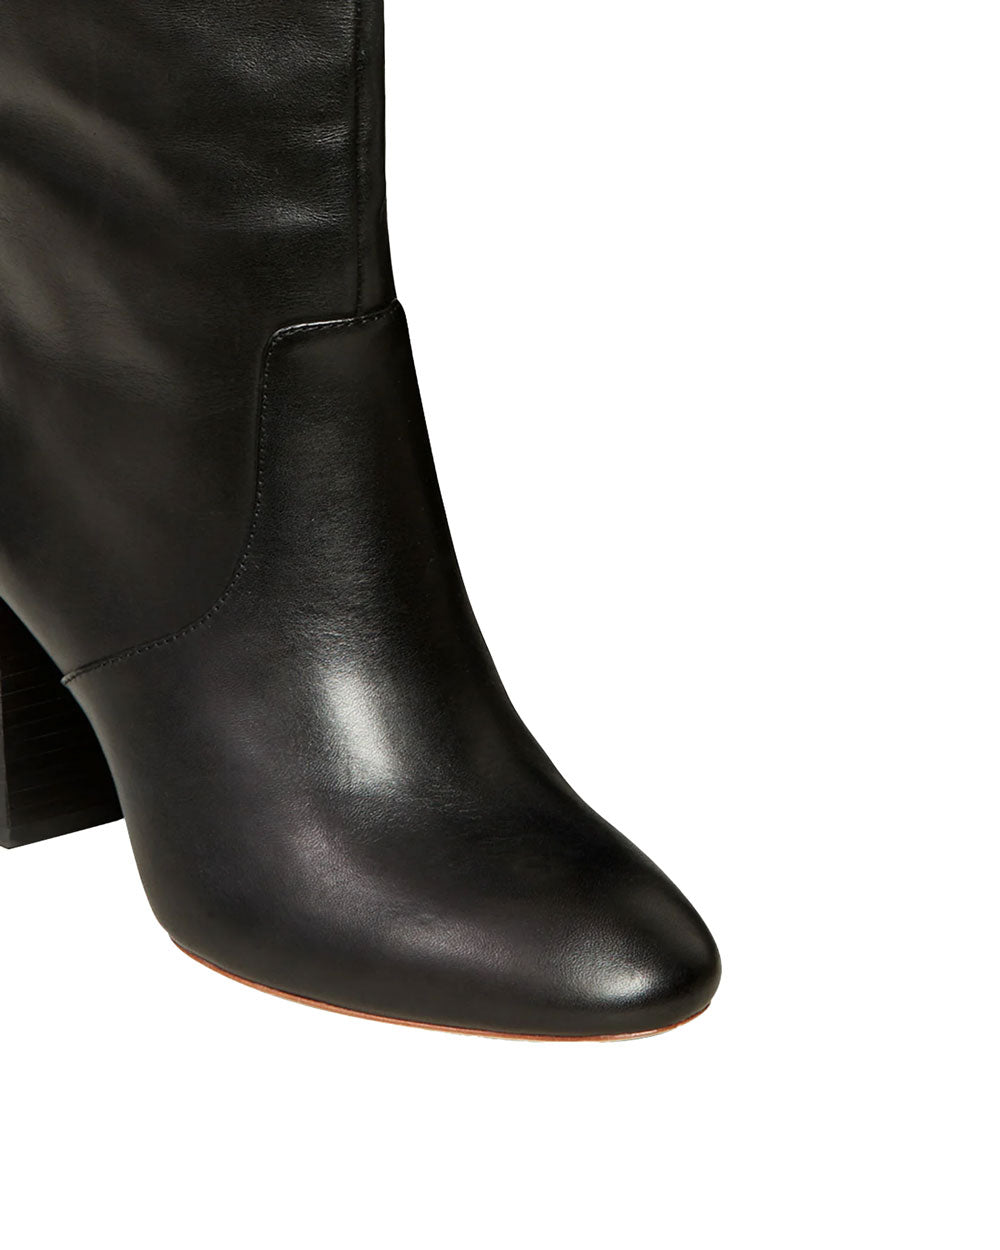 Goldy Tall Boot in Black